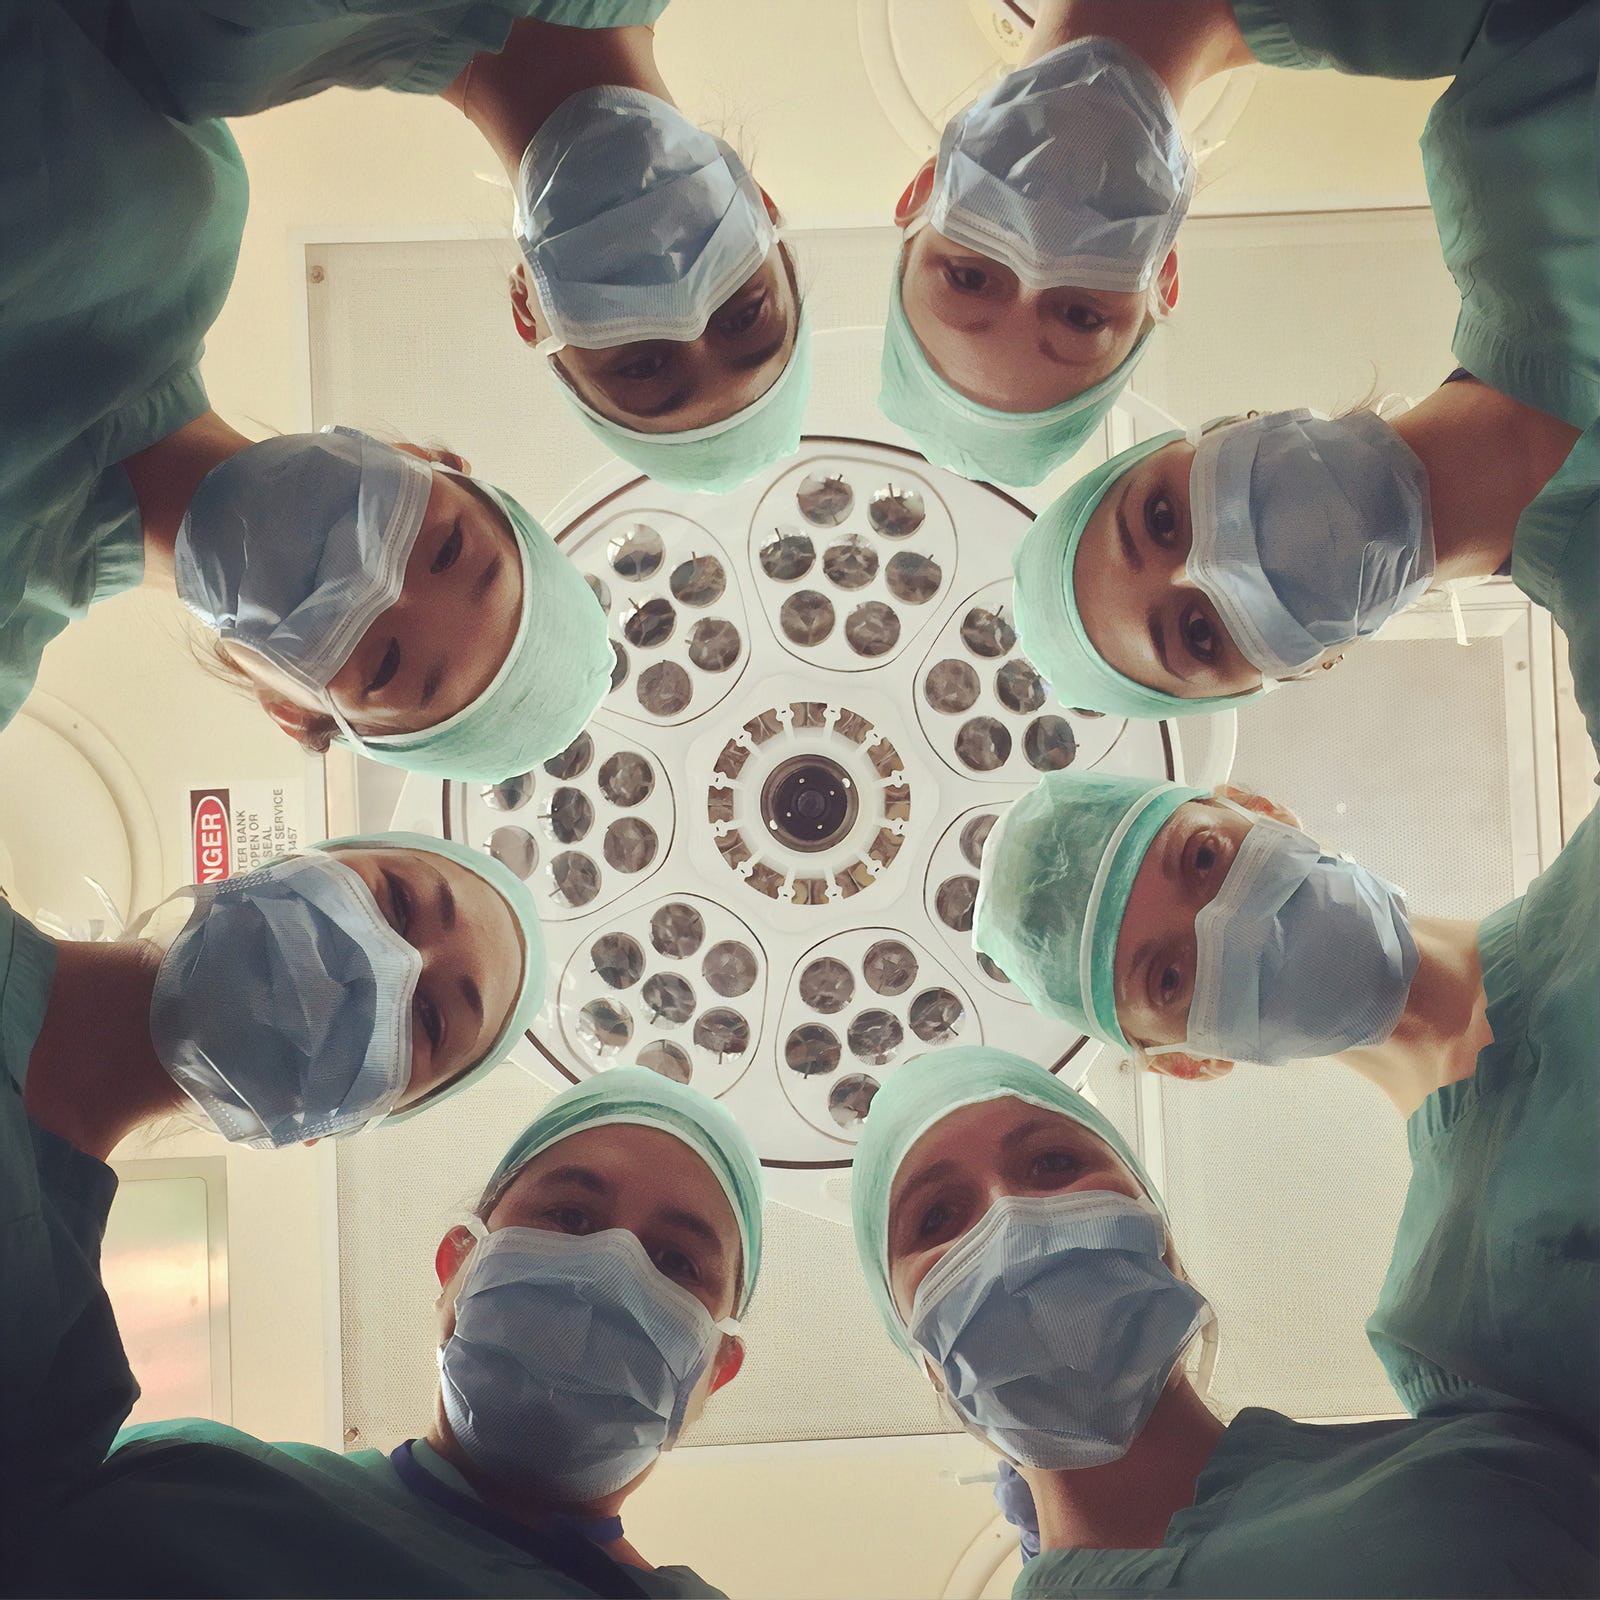 Eight surgeons look down at us in an operating theater. I am particularly intrigued with the idea of using full-body MRI scans for those who are at high risk for cancer. For example, those with particular genetic disorders might be good candidates.